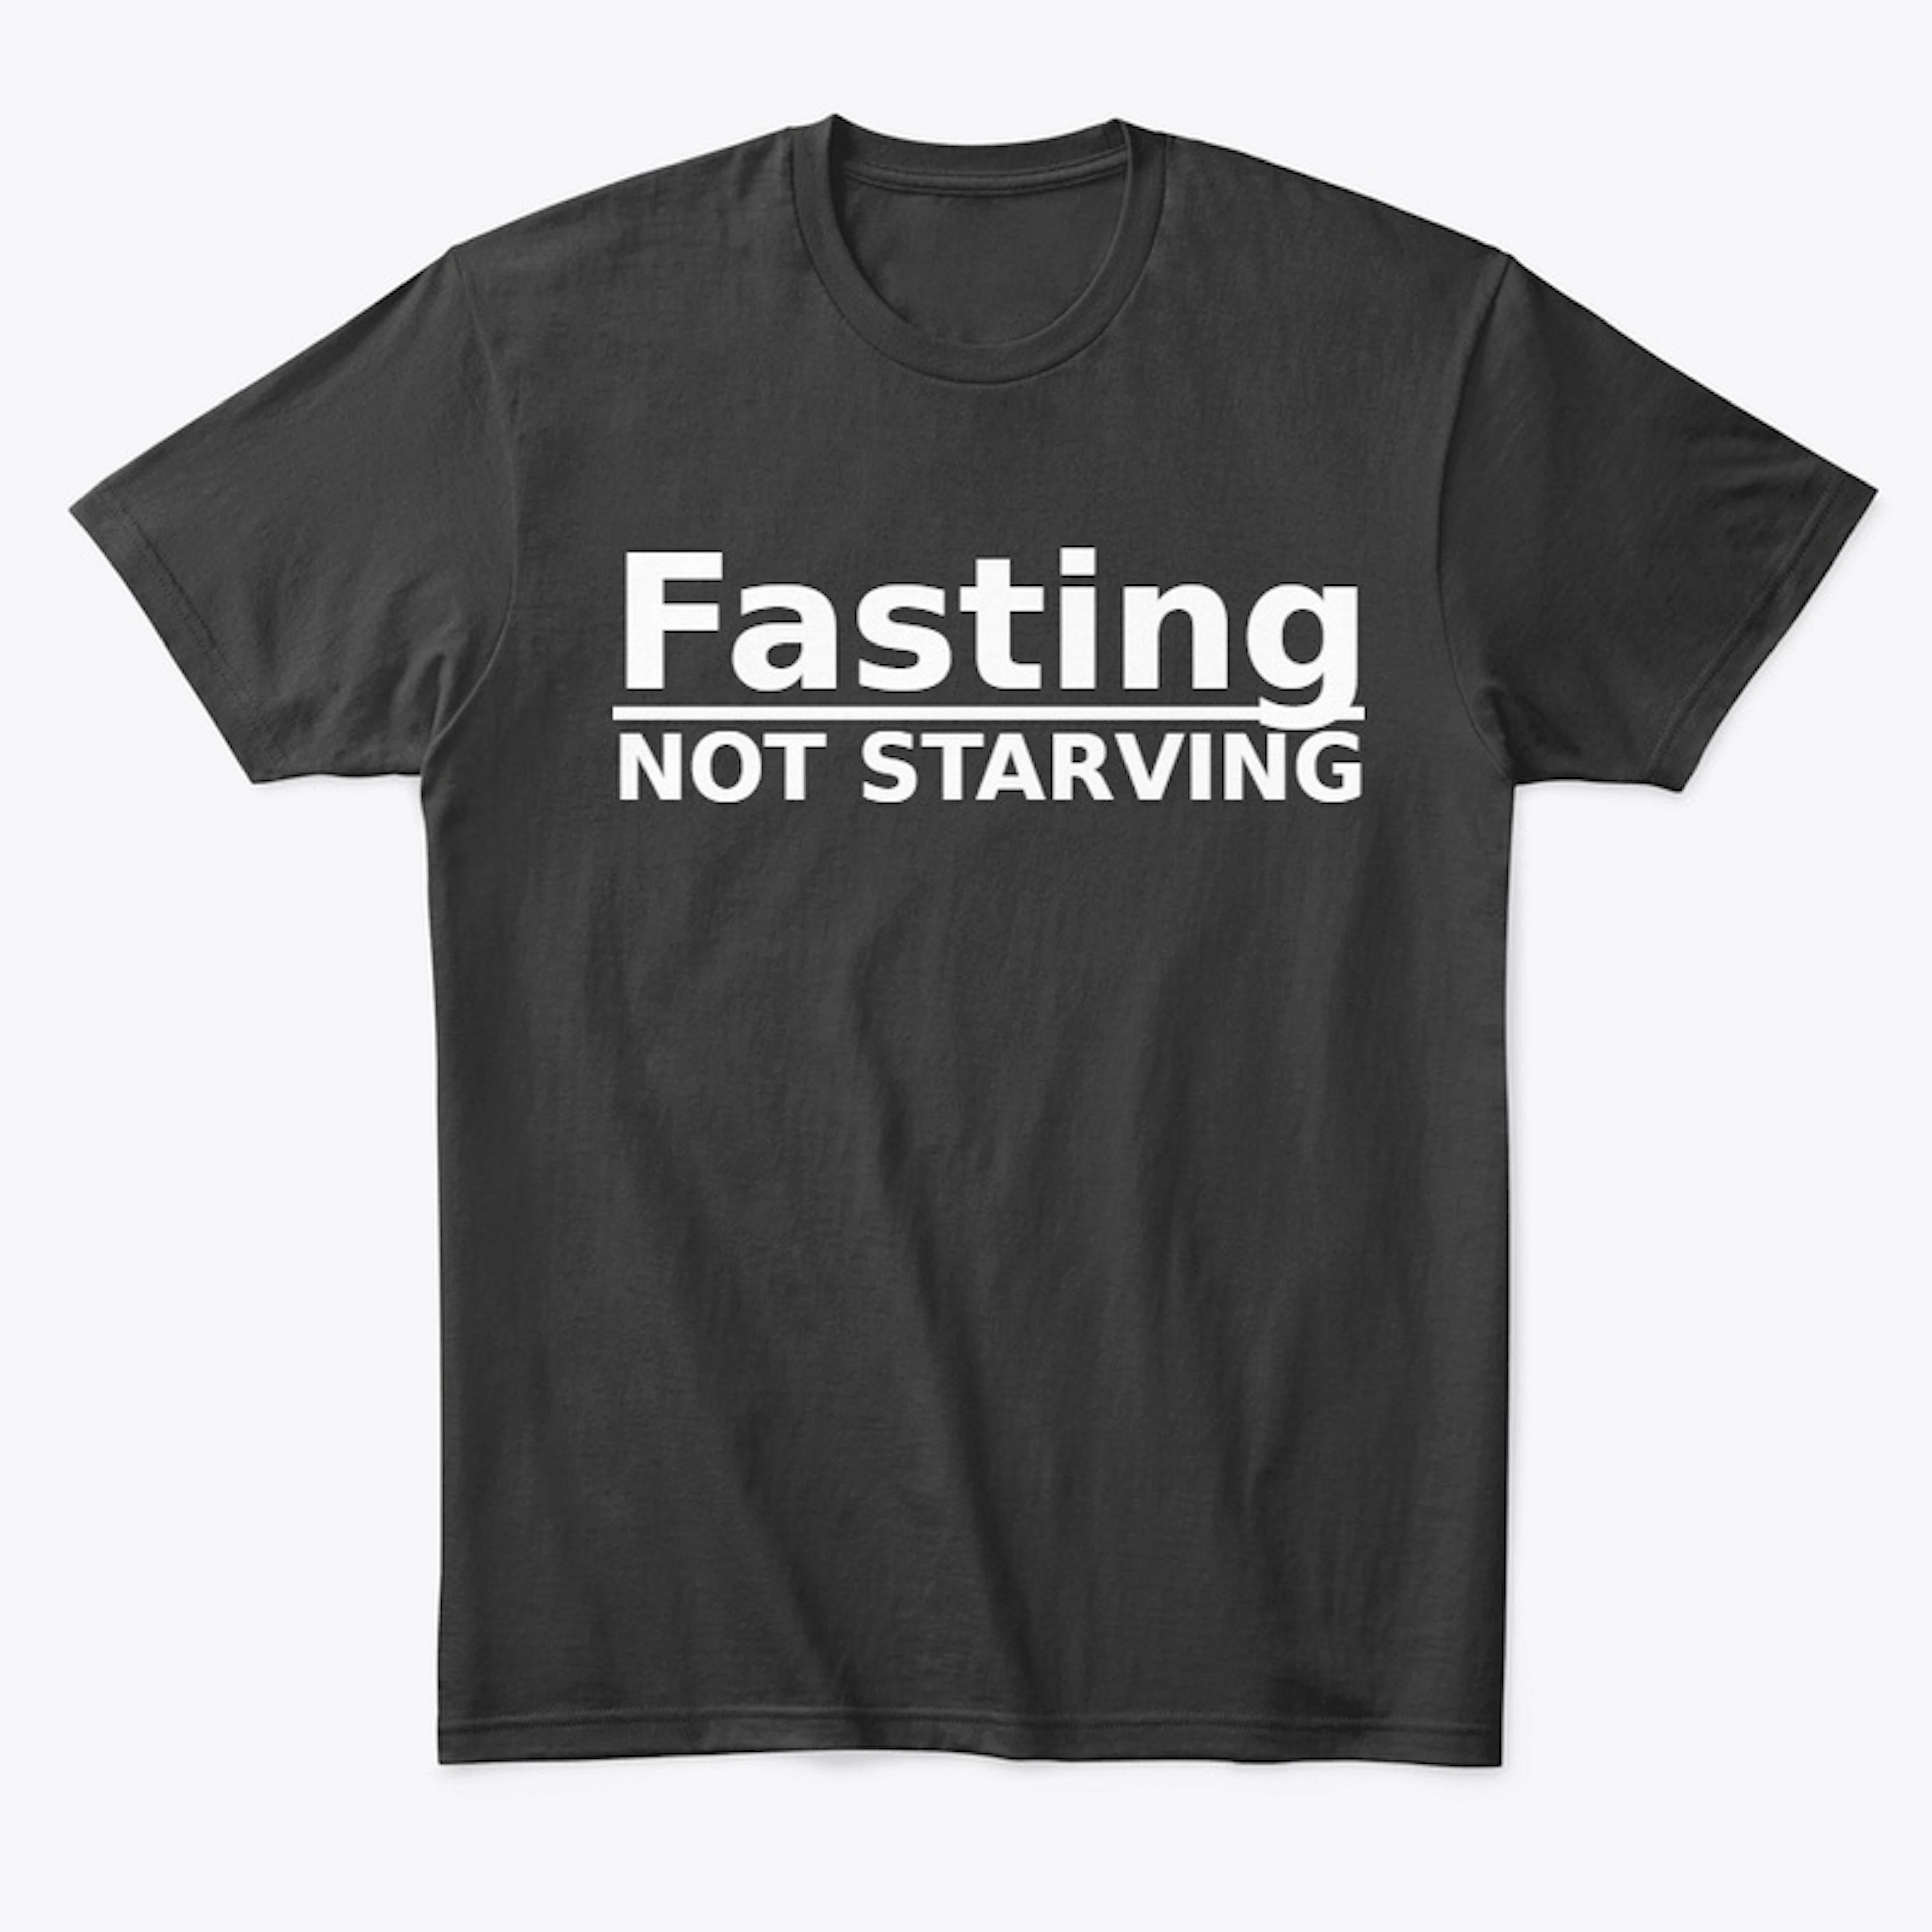 Fasting NOT Starving